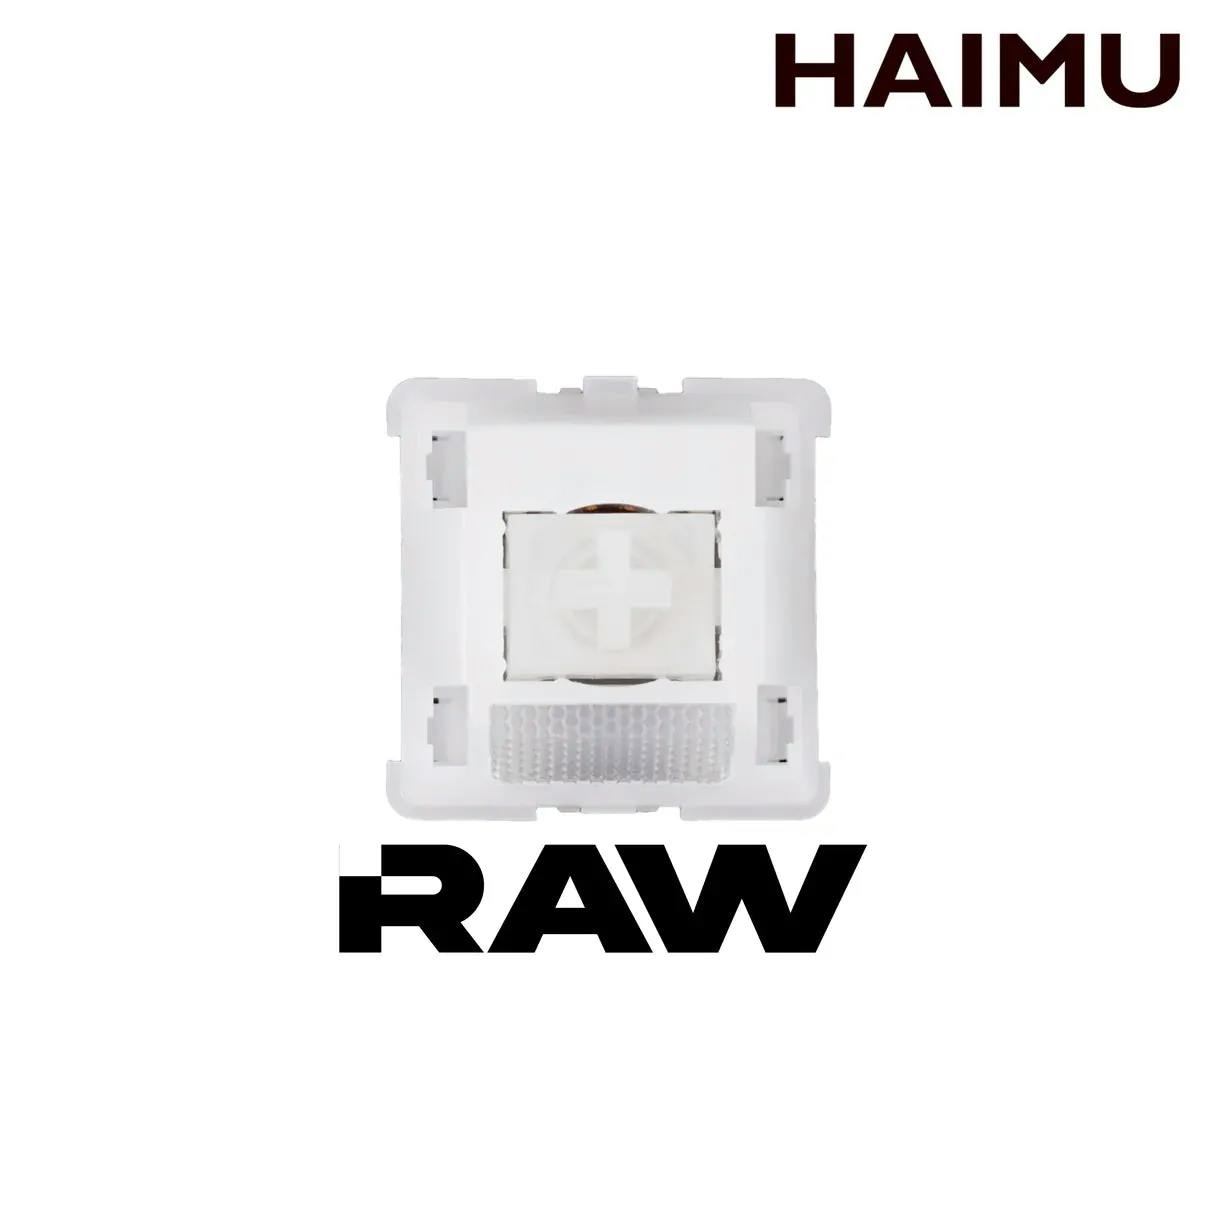 Image for Haimu Raw Linear Switches